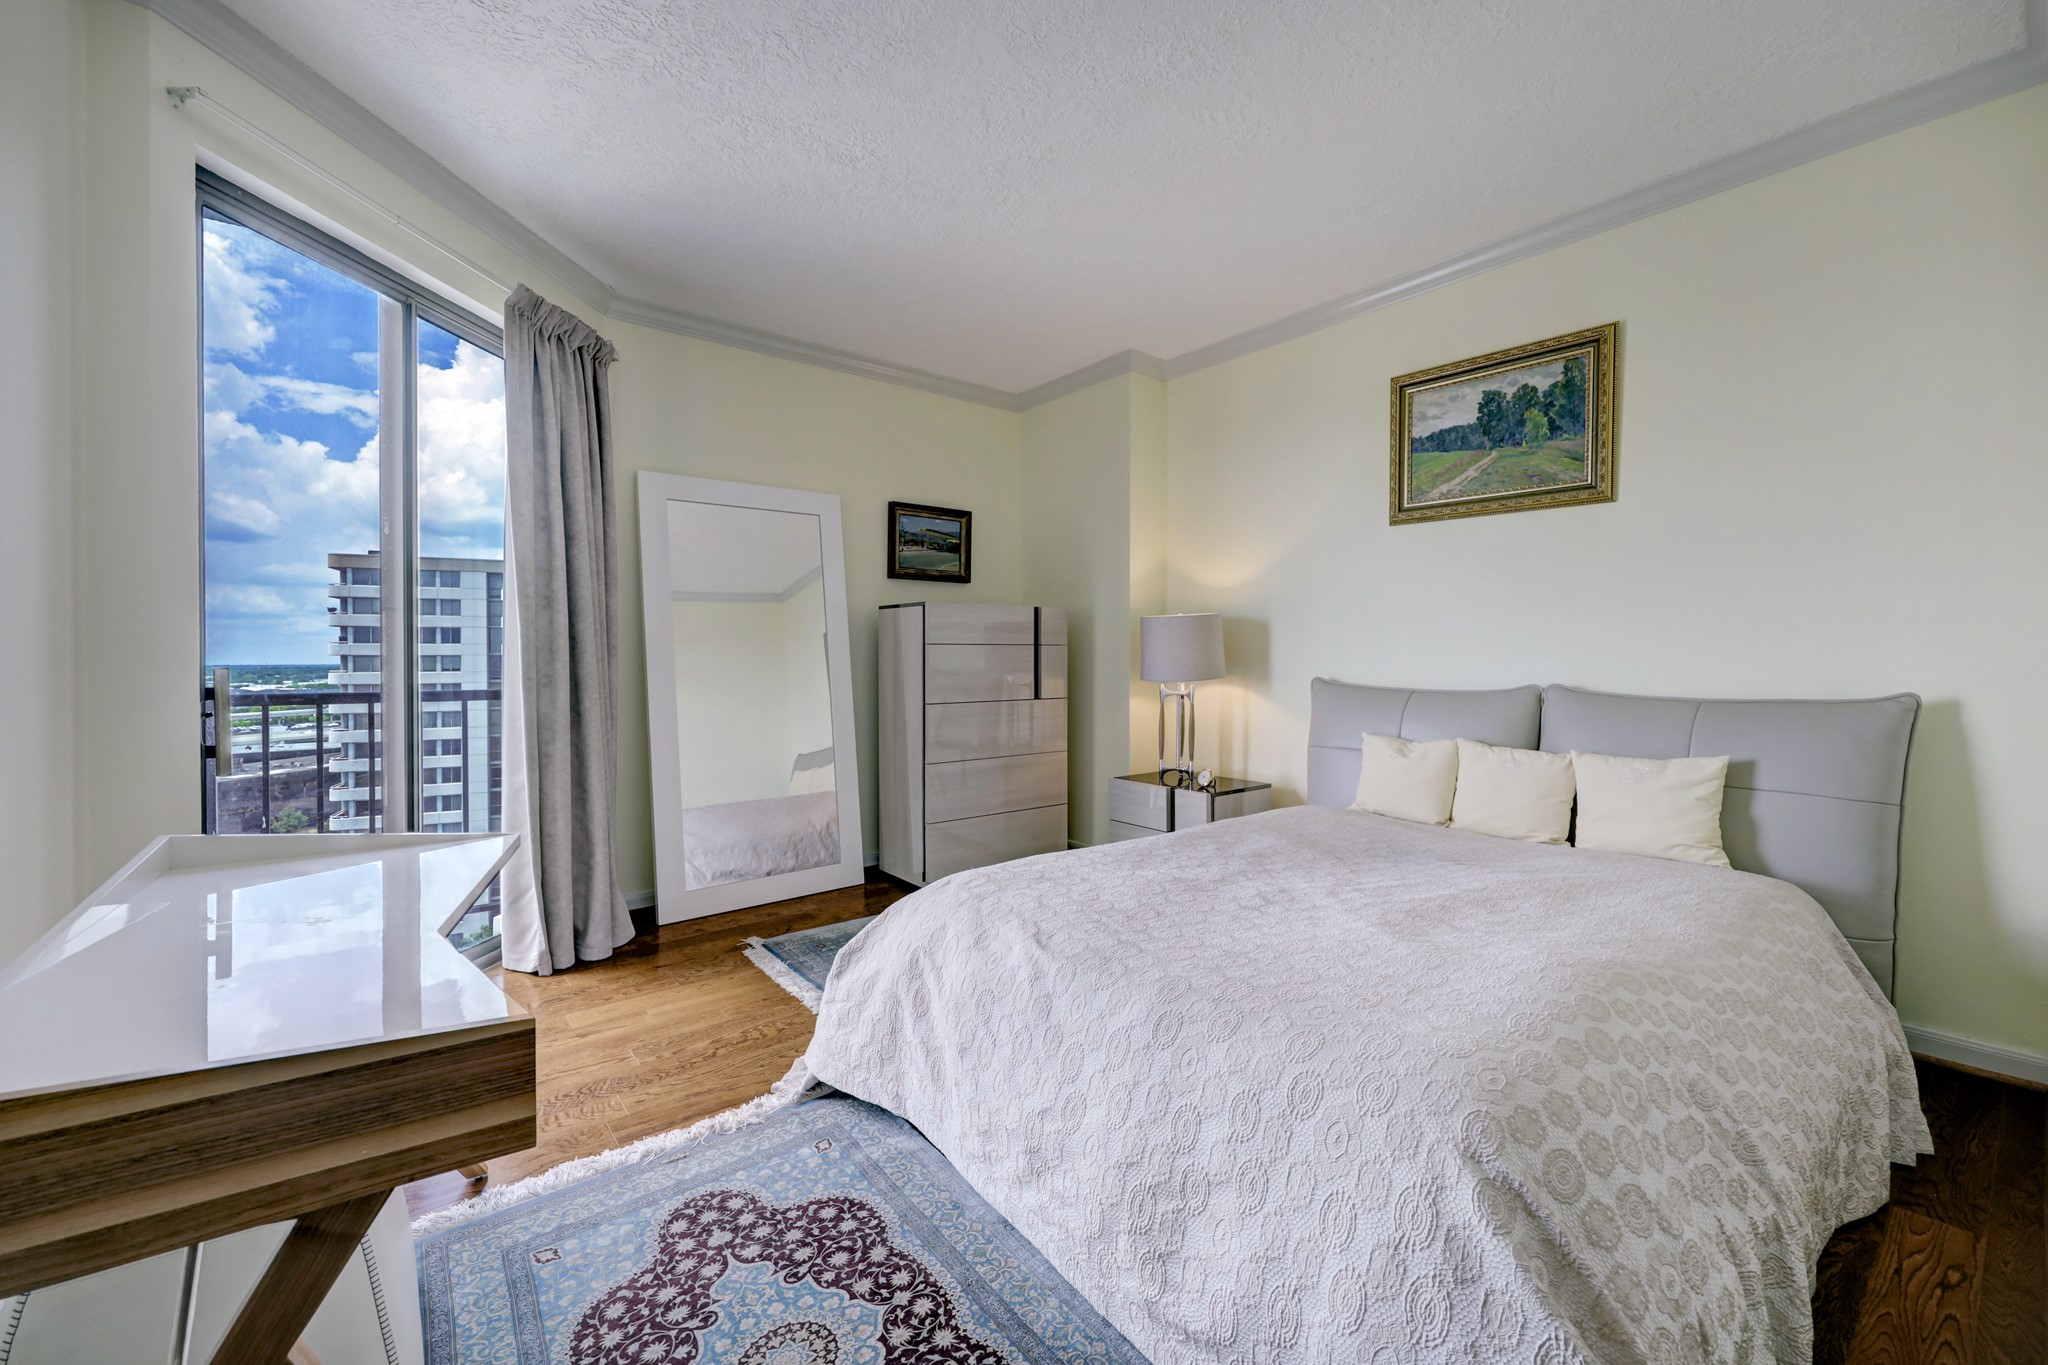 The primary bedroom has two walk-in closets and hardwood flooring. Sliding door access to the balcony